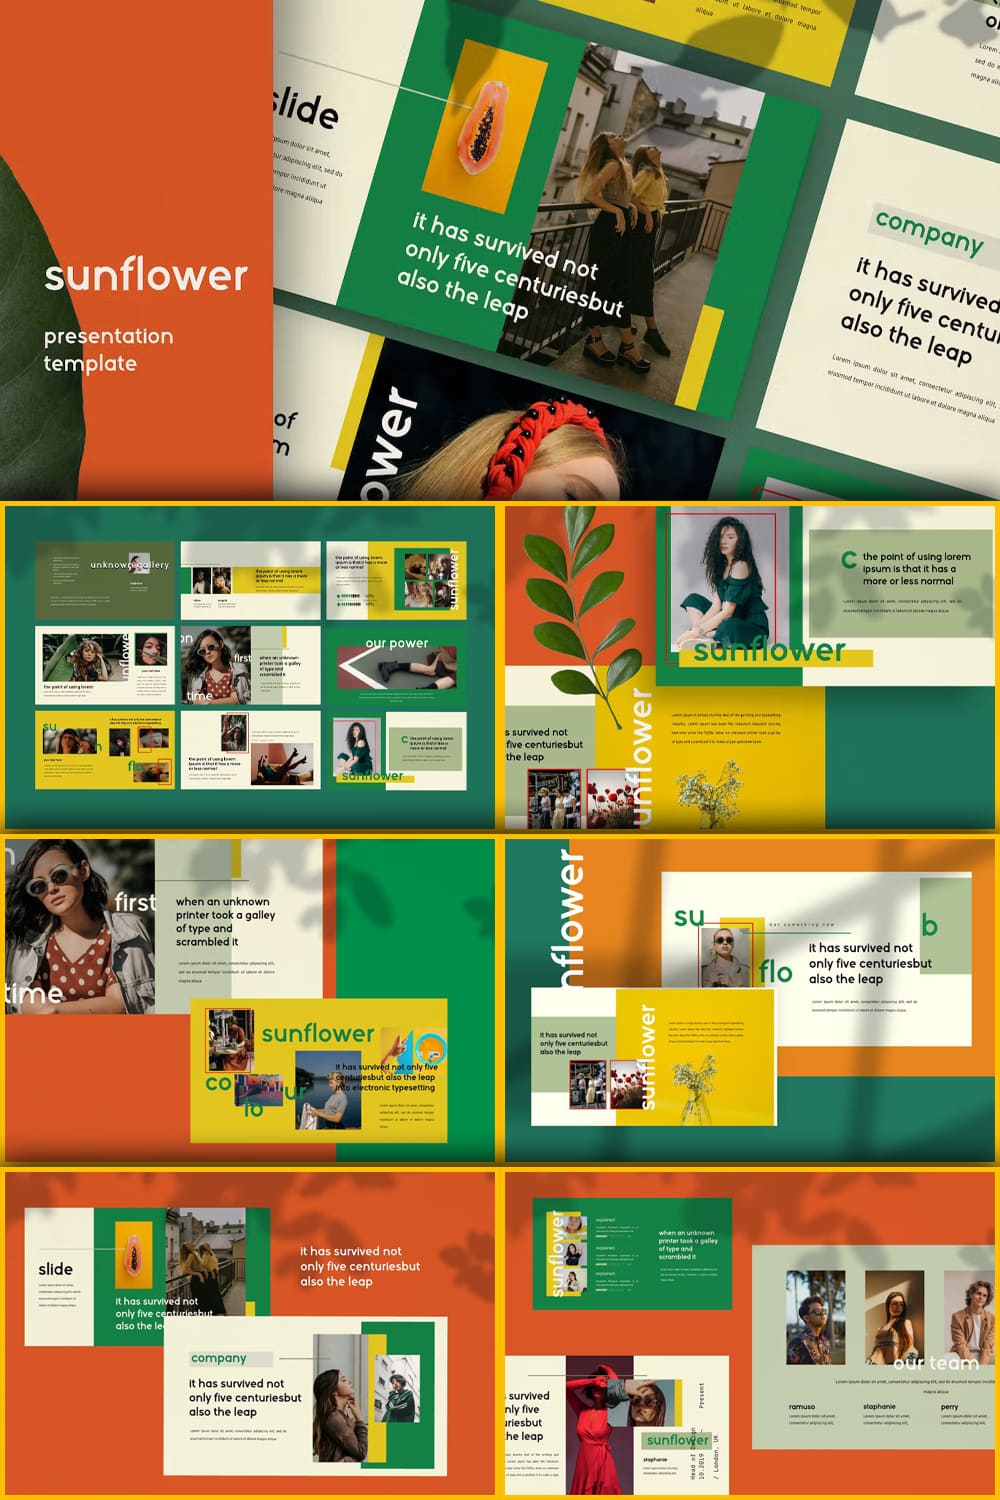 Sunflowers powerpoint creative business company - pinterest image preview.